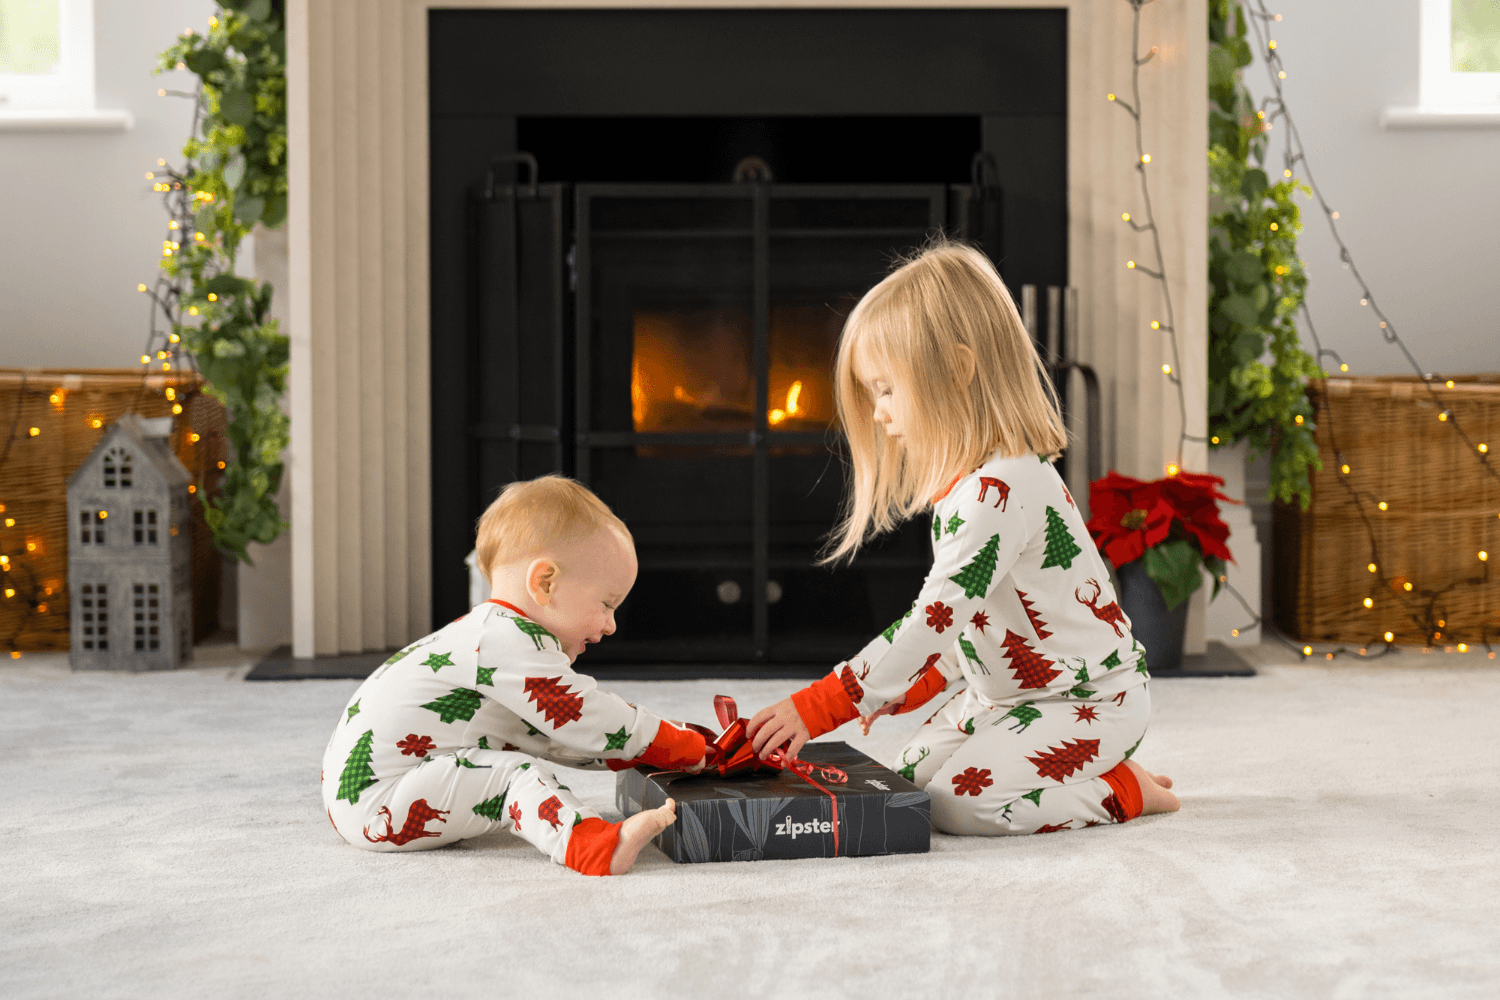 Christmas Traditions for New Families - Zipster